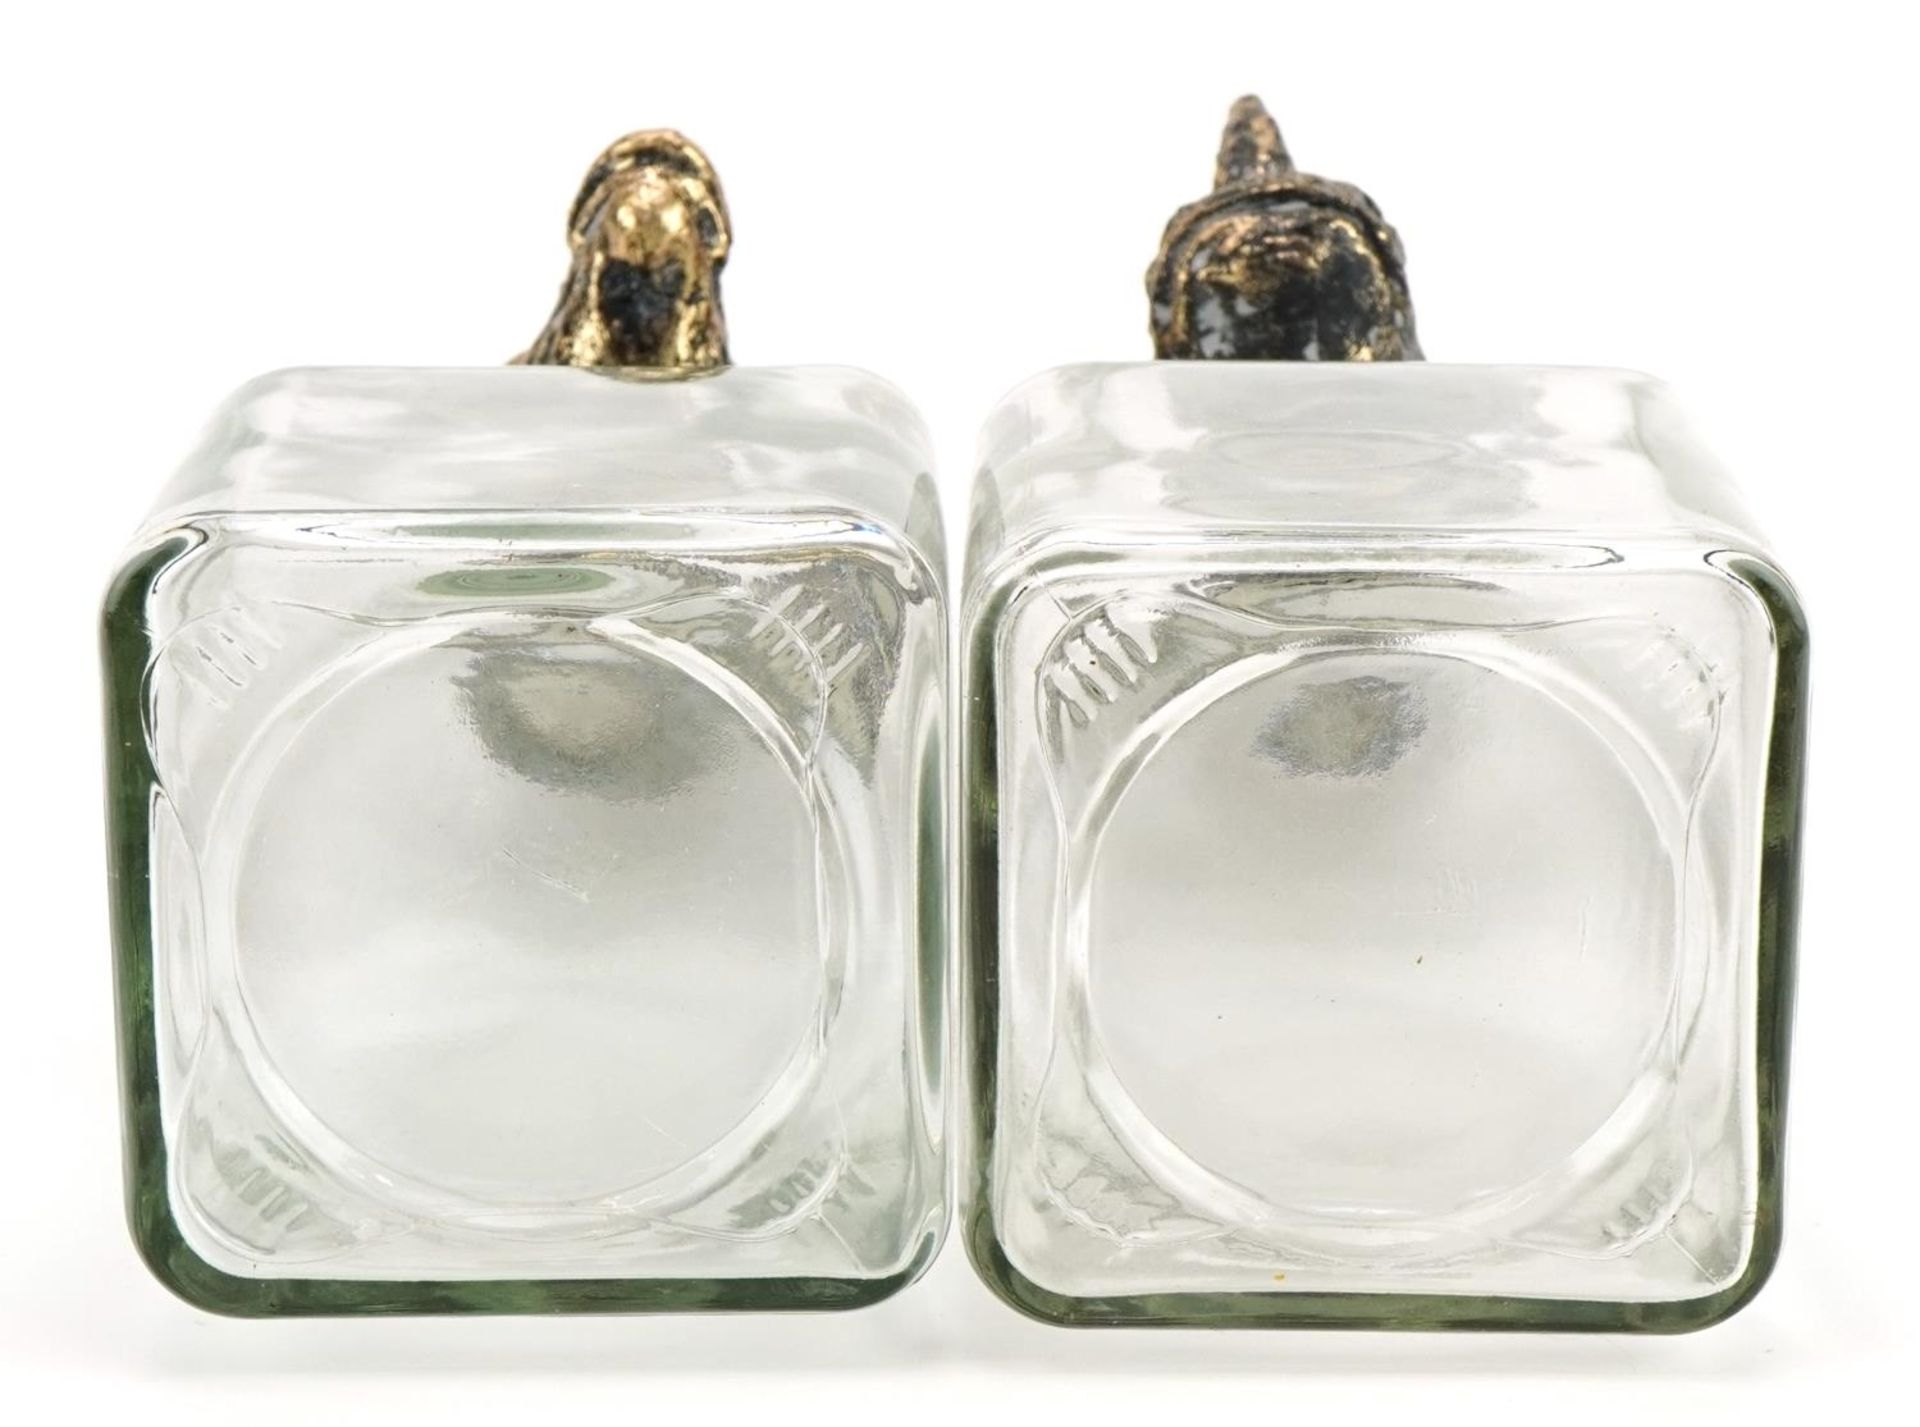 Pair of novelty glass decanters with rhinoceros and giraffe head stoppers, the largest 25cm high - Image 3 of 3